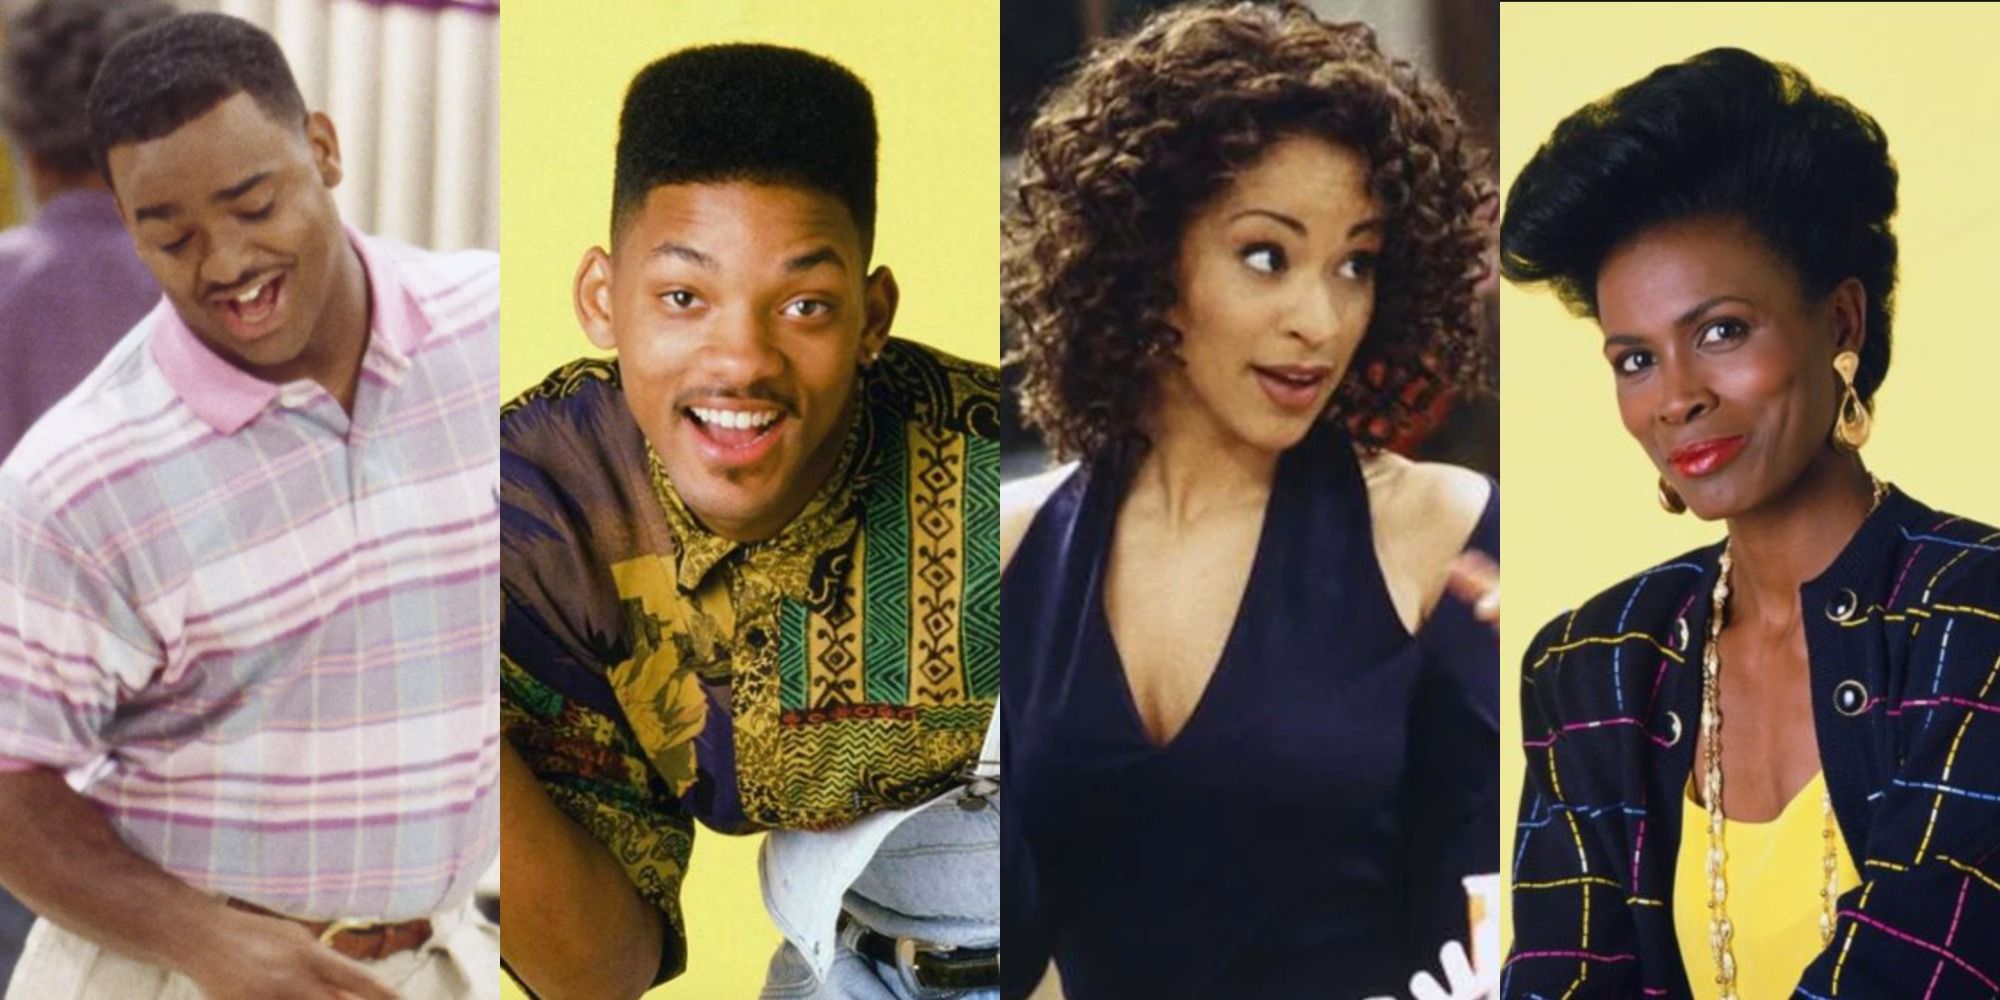 The Fresh Prince Of Bel Air The 10 Most Popular Actors Ranked By Instagram Followers